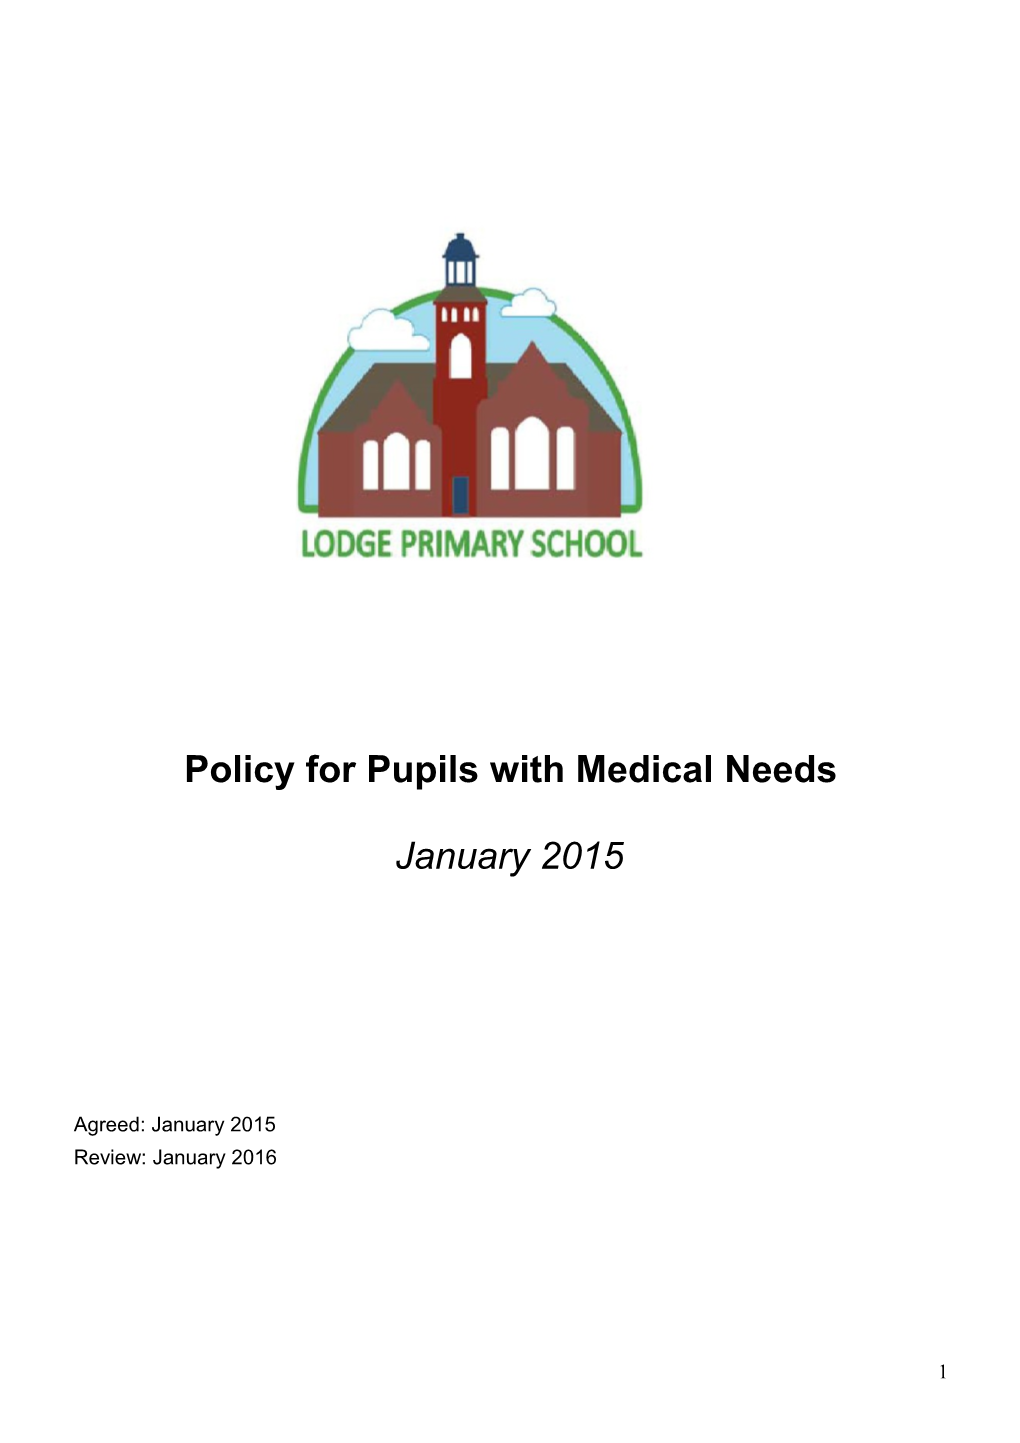 Policy for Pupils with Medical Needs